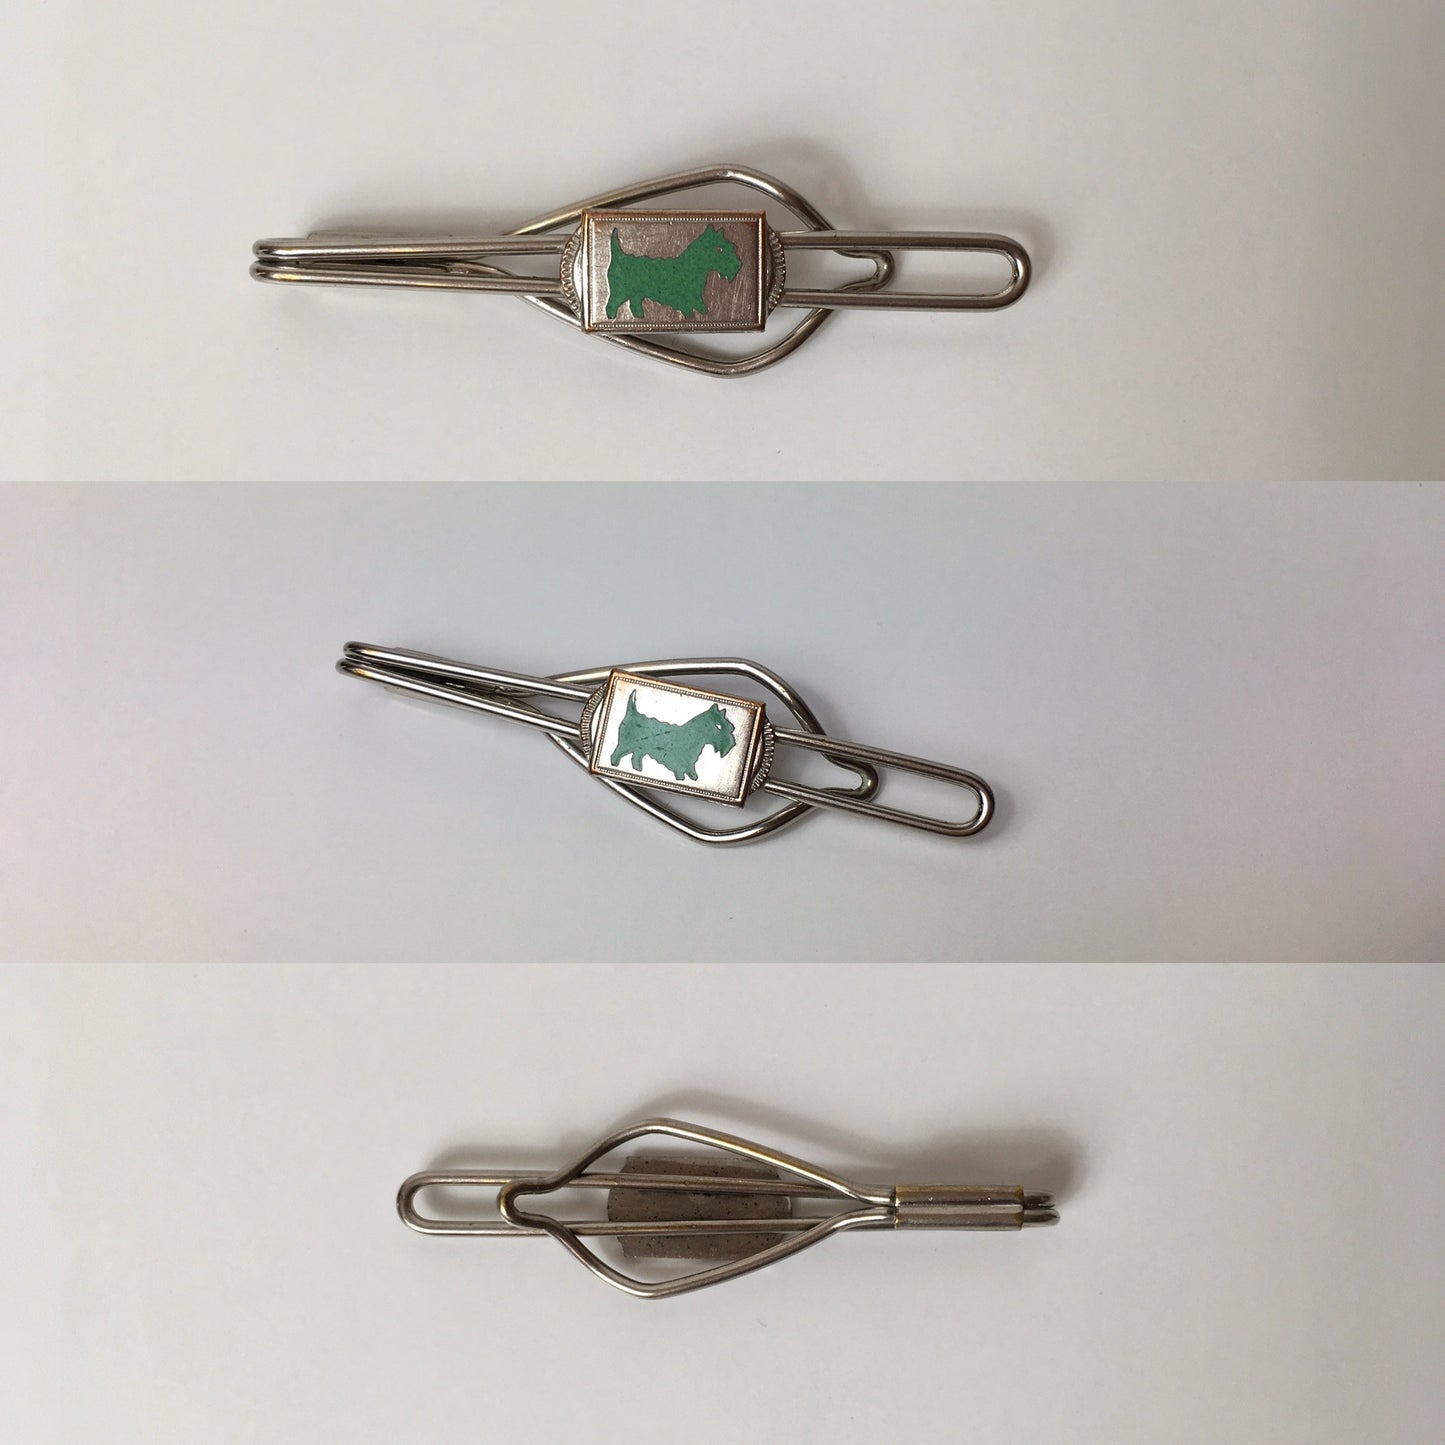 Original Gents Tie Pin - With a lovely Deco Green Scottie Dog Motif